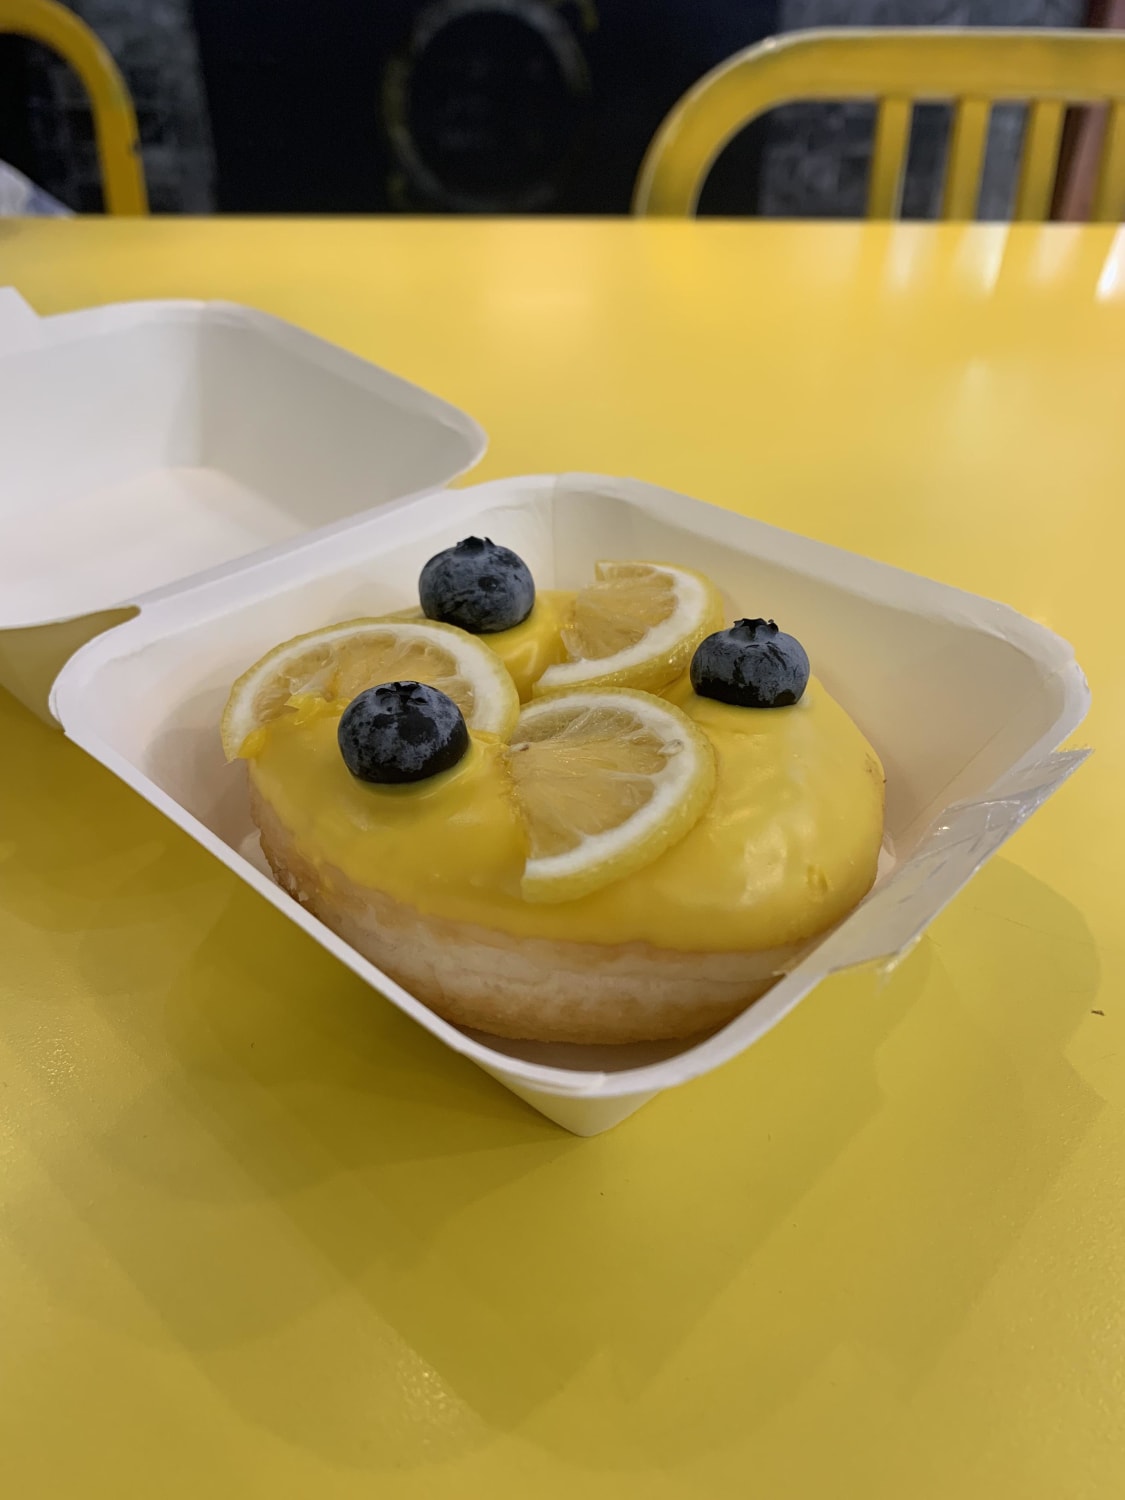 [I ate] a beautiful and super yummy lemon curd donut topped with blueberries and lemon chocolate